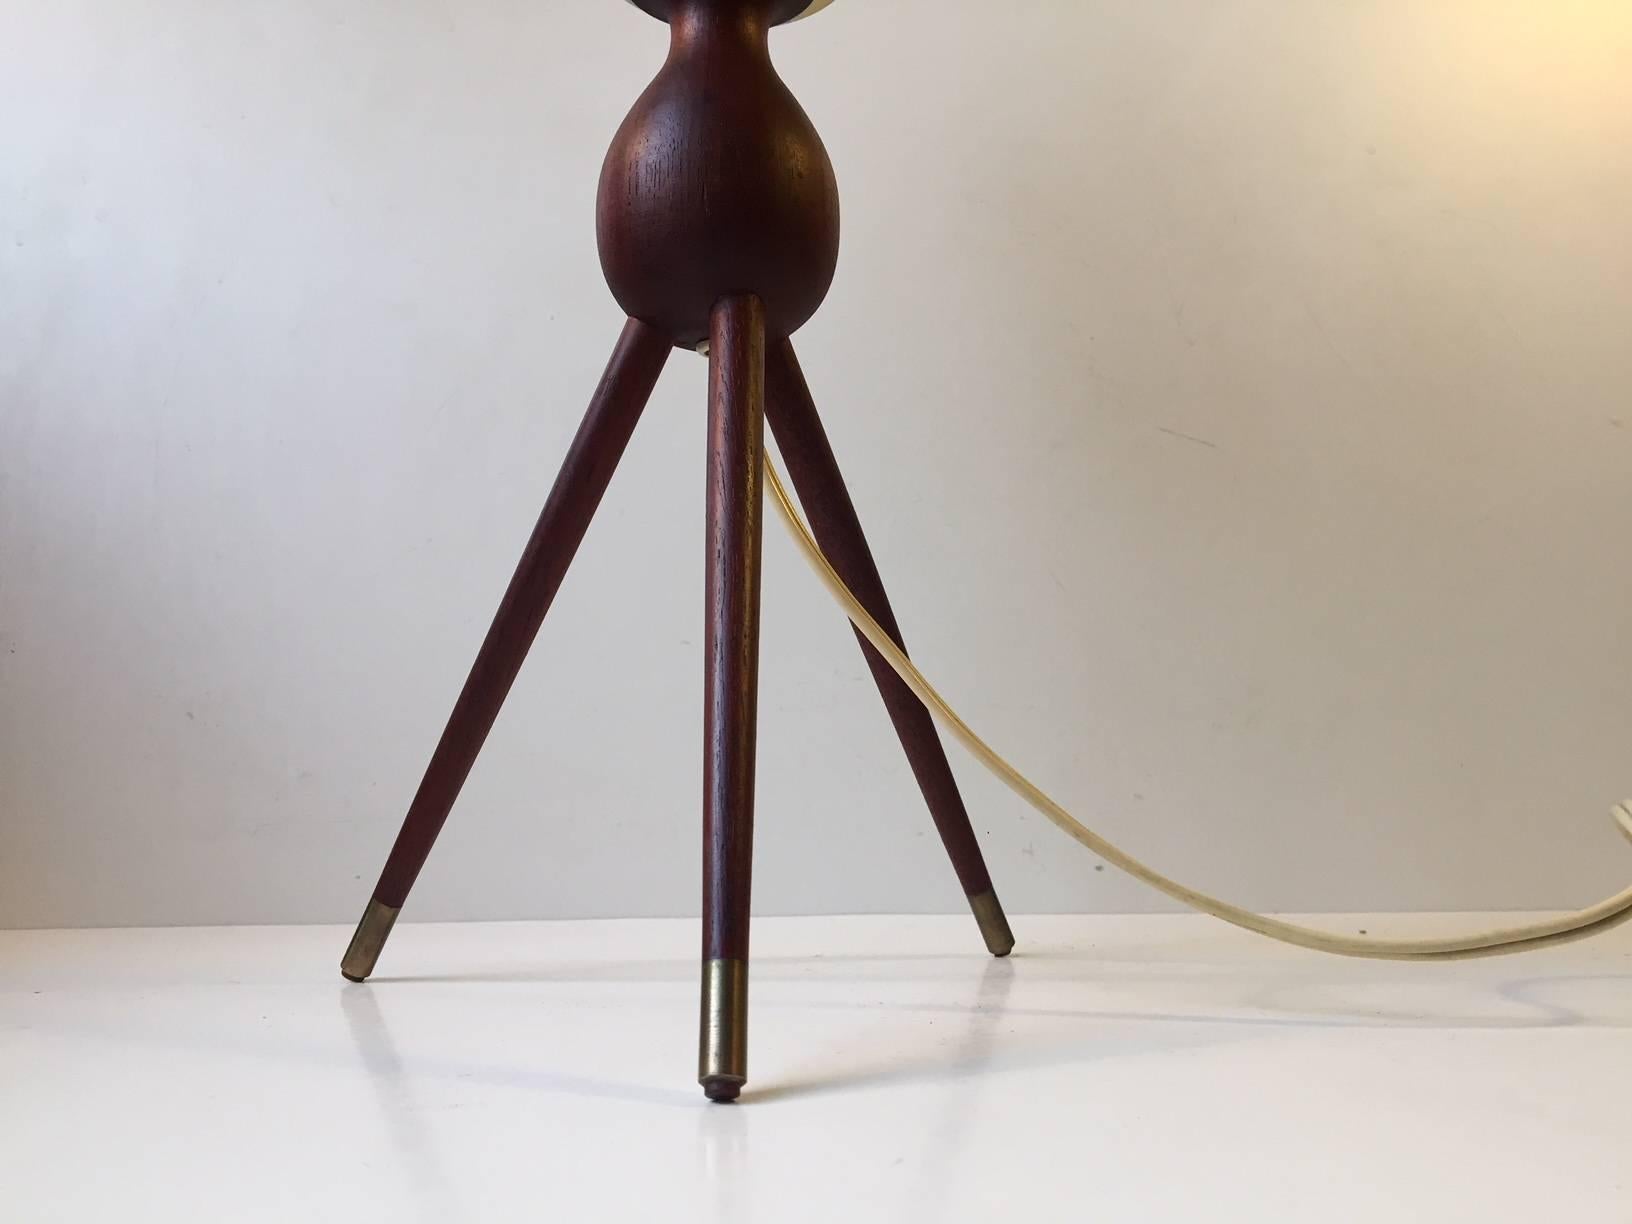 Mid-20th Century Danish Sputnik Table Lamp in Teak, Brass and Cut Glass, 1950s For Sale